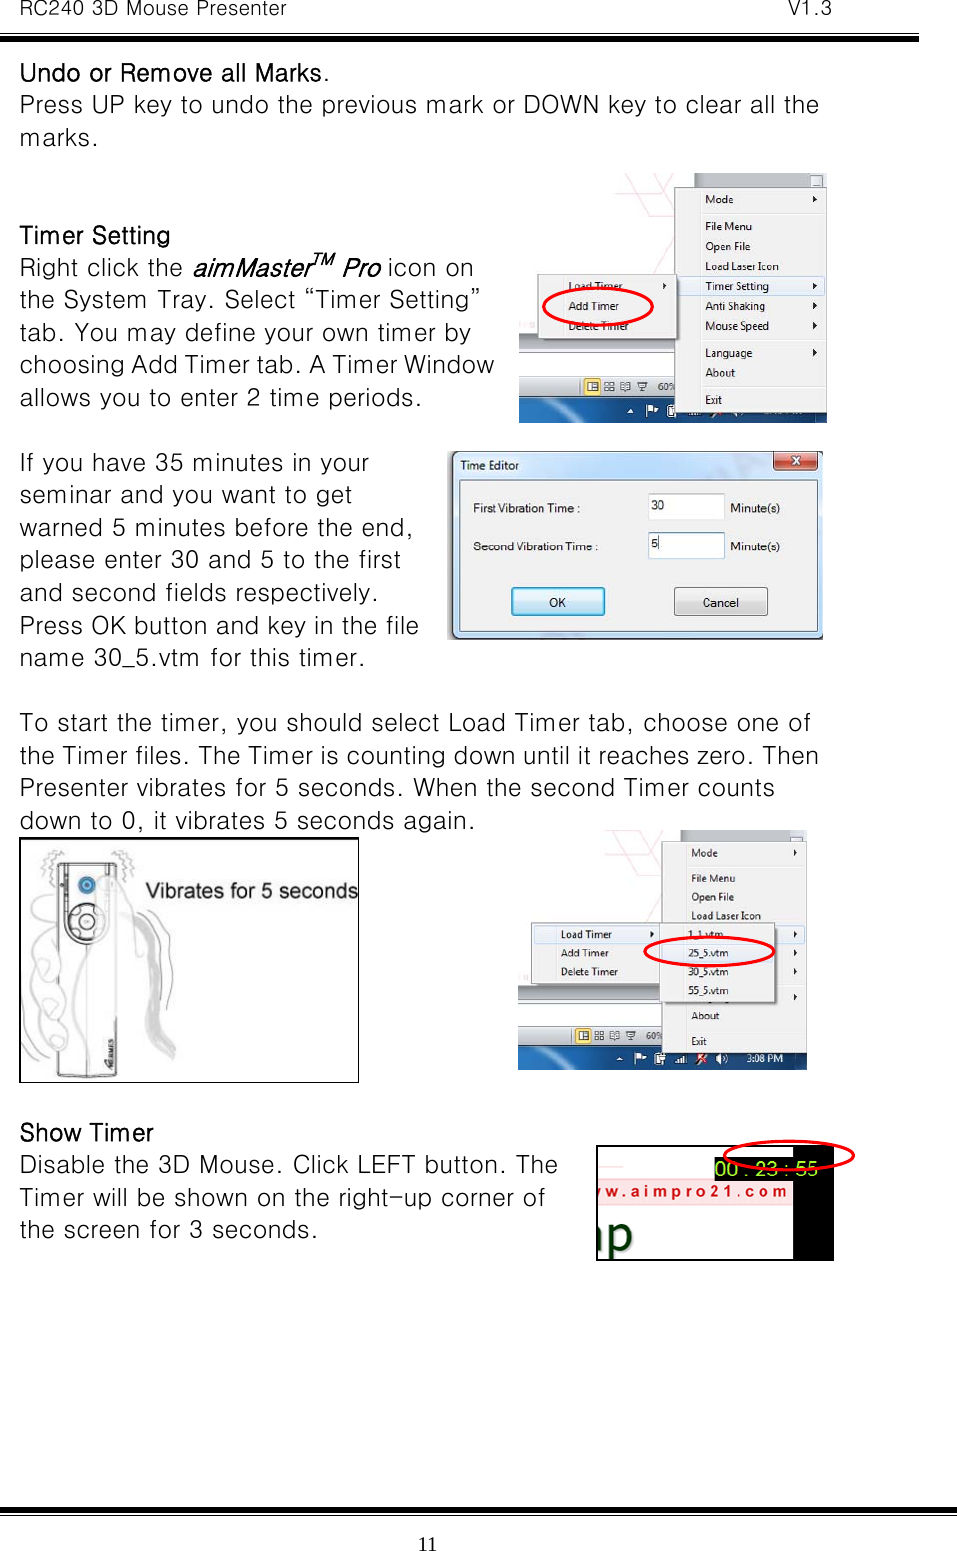 RC240 3D Mouse Presenter   V1.3  11Undo or Remove all Marks. Press UP key to undo the previous mark or DOWN key to clear all the marks.   Timer Setting Right click the aimMasterTM Pro icon on the System Tray. Select “Timer Setting” tab. You may define your own timer by choosing Add Timer tab. A Timer Window allows you to enter 2 time periods.    If you have 35 minutes in your seminar and you want to get warned 5 minutes before the end, please enter 30 and 5 to the first and second fields respectively. Press OK button and key in the file name 30_5.vtm for this timer.  To start the timer, you should select Load Timer tab, choose one of the Timer files. The Timer is counting down until it reaches zero. Then Presenter vibrates for 5 seconds. When the second Timer counts down to 0, it vibrates 5 seconds again.   Show Timer Disable the 3D Mouse. Click LEFT button. The Timer will be shown on the right-up corner of the screen for 3 seconds.   